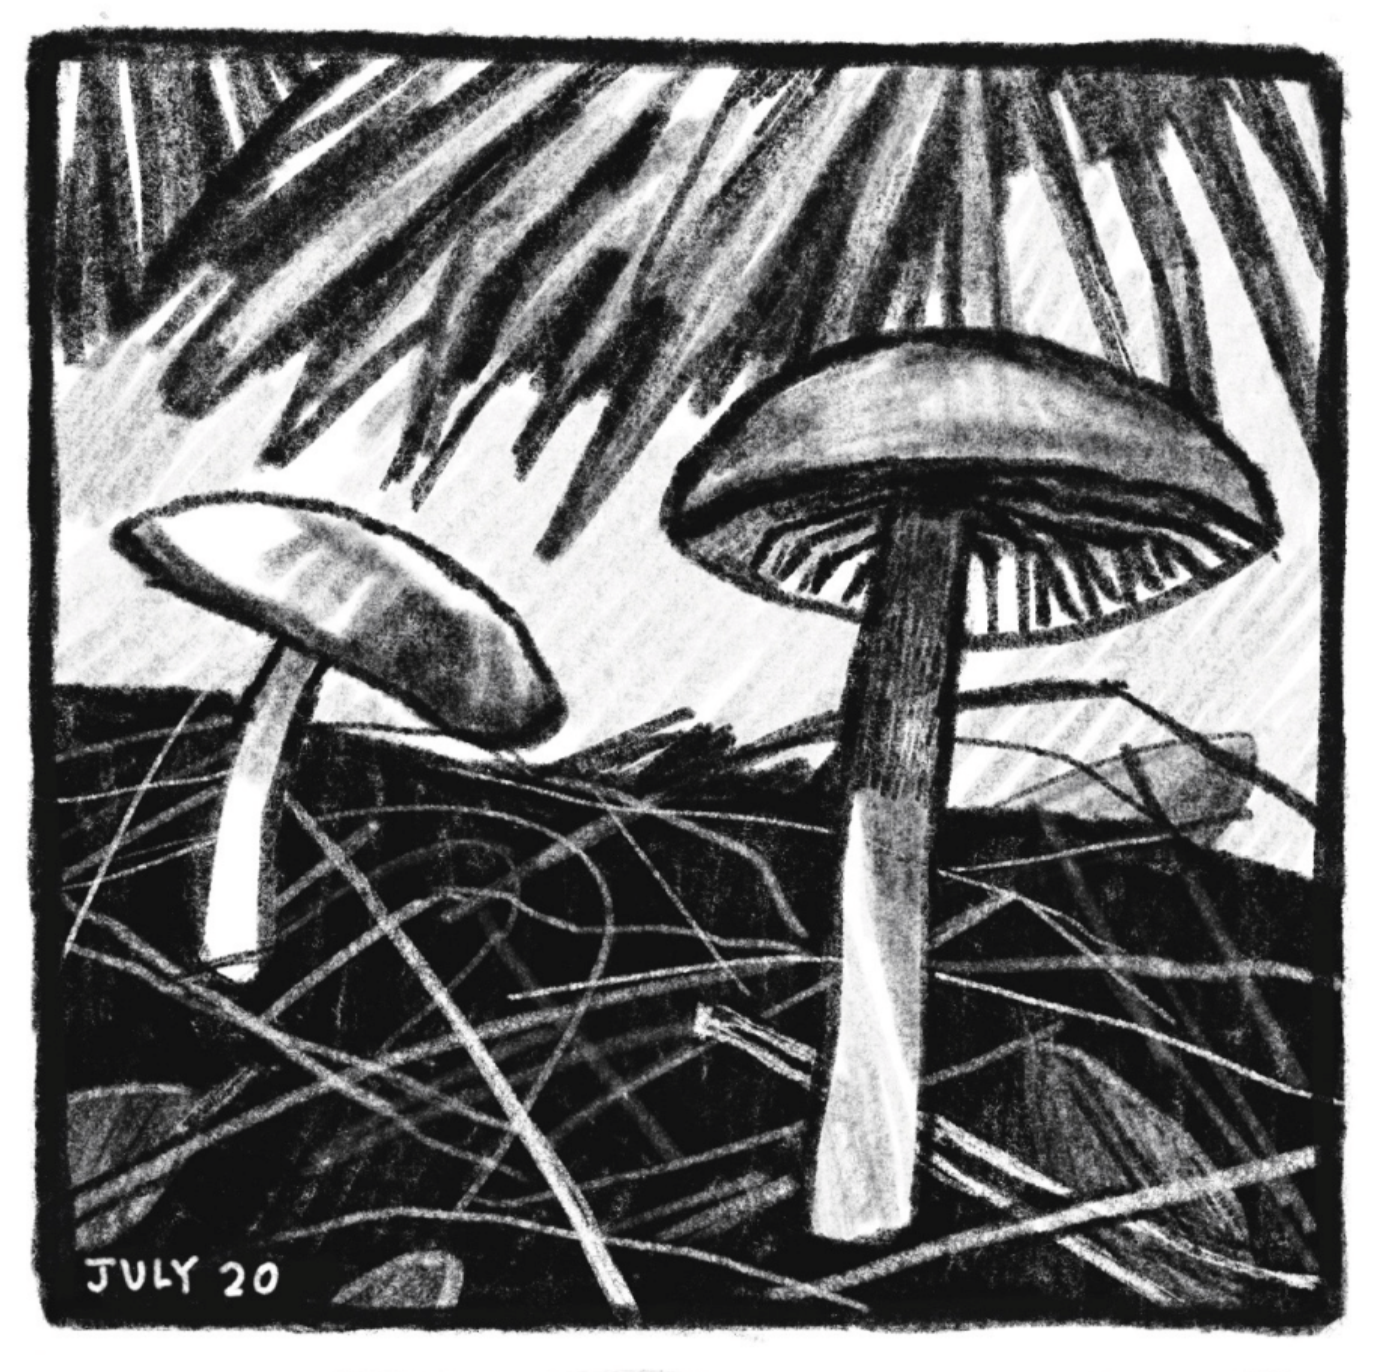 1. A close-up view of two mushrooms with umbrella-like caps and long stems. The mushrooms are surrounded by twigs on the ground and a saw palmetto frond above them. â€œJuly 20.â€